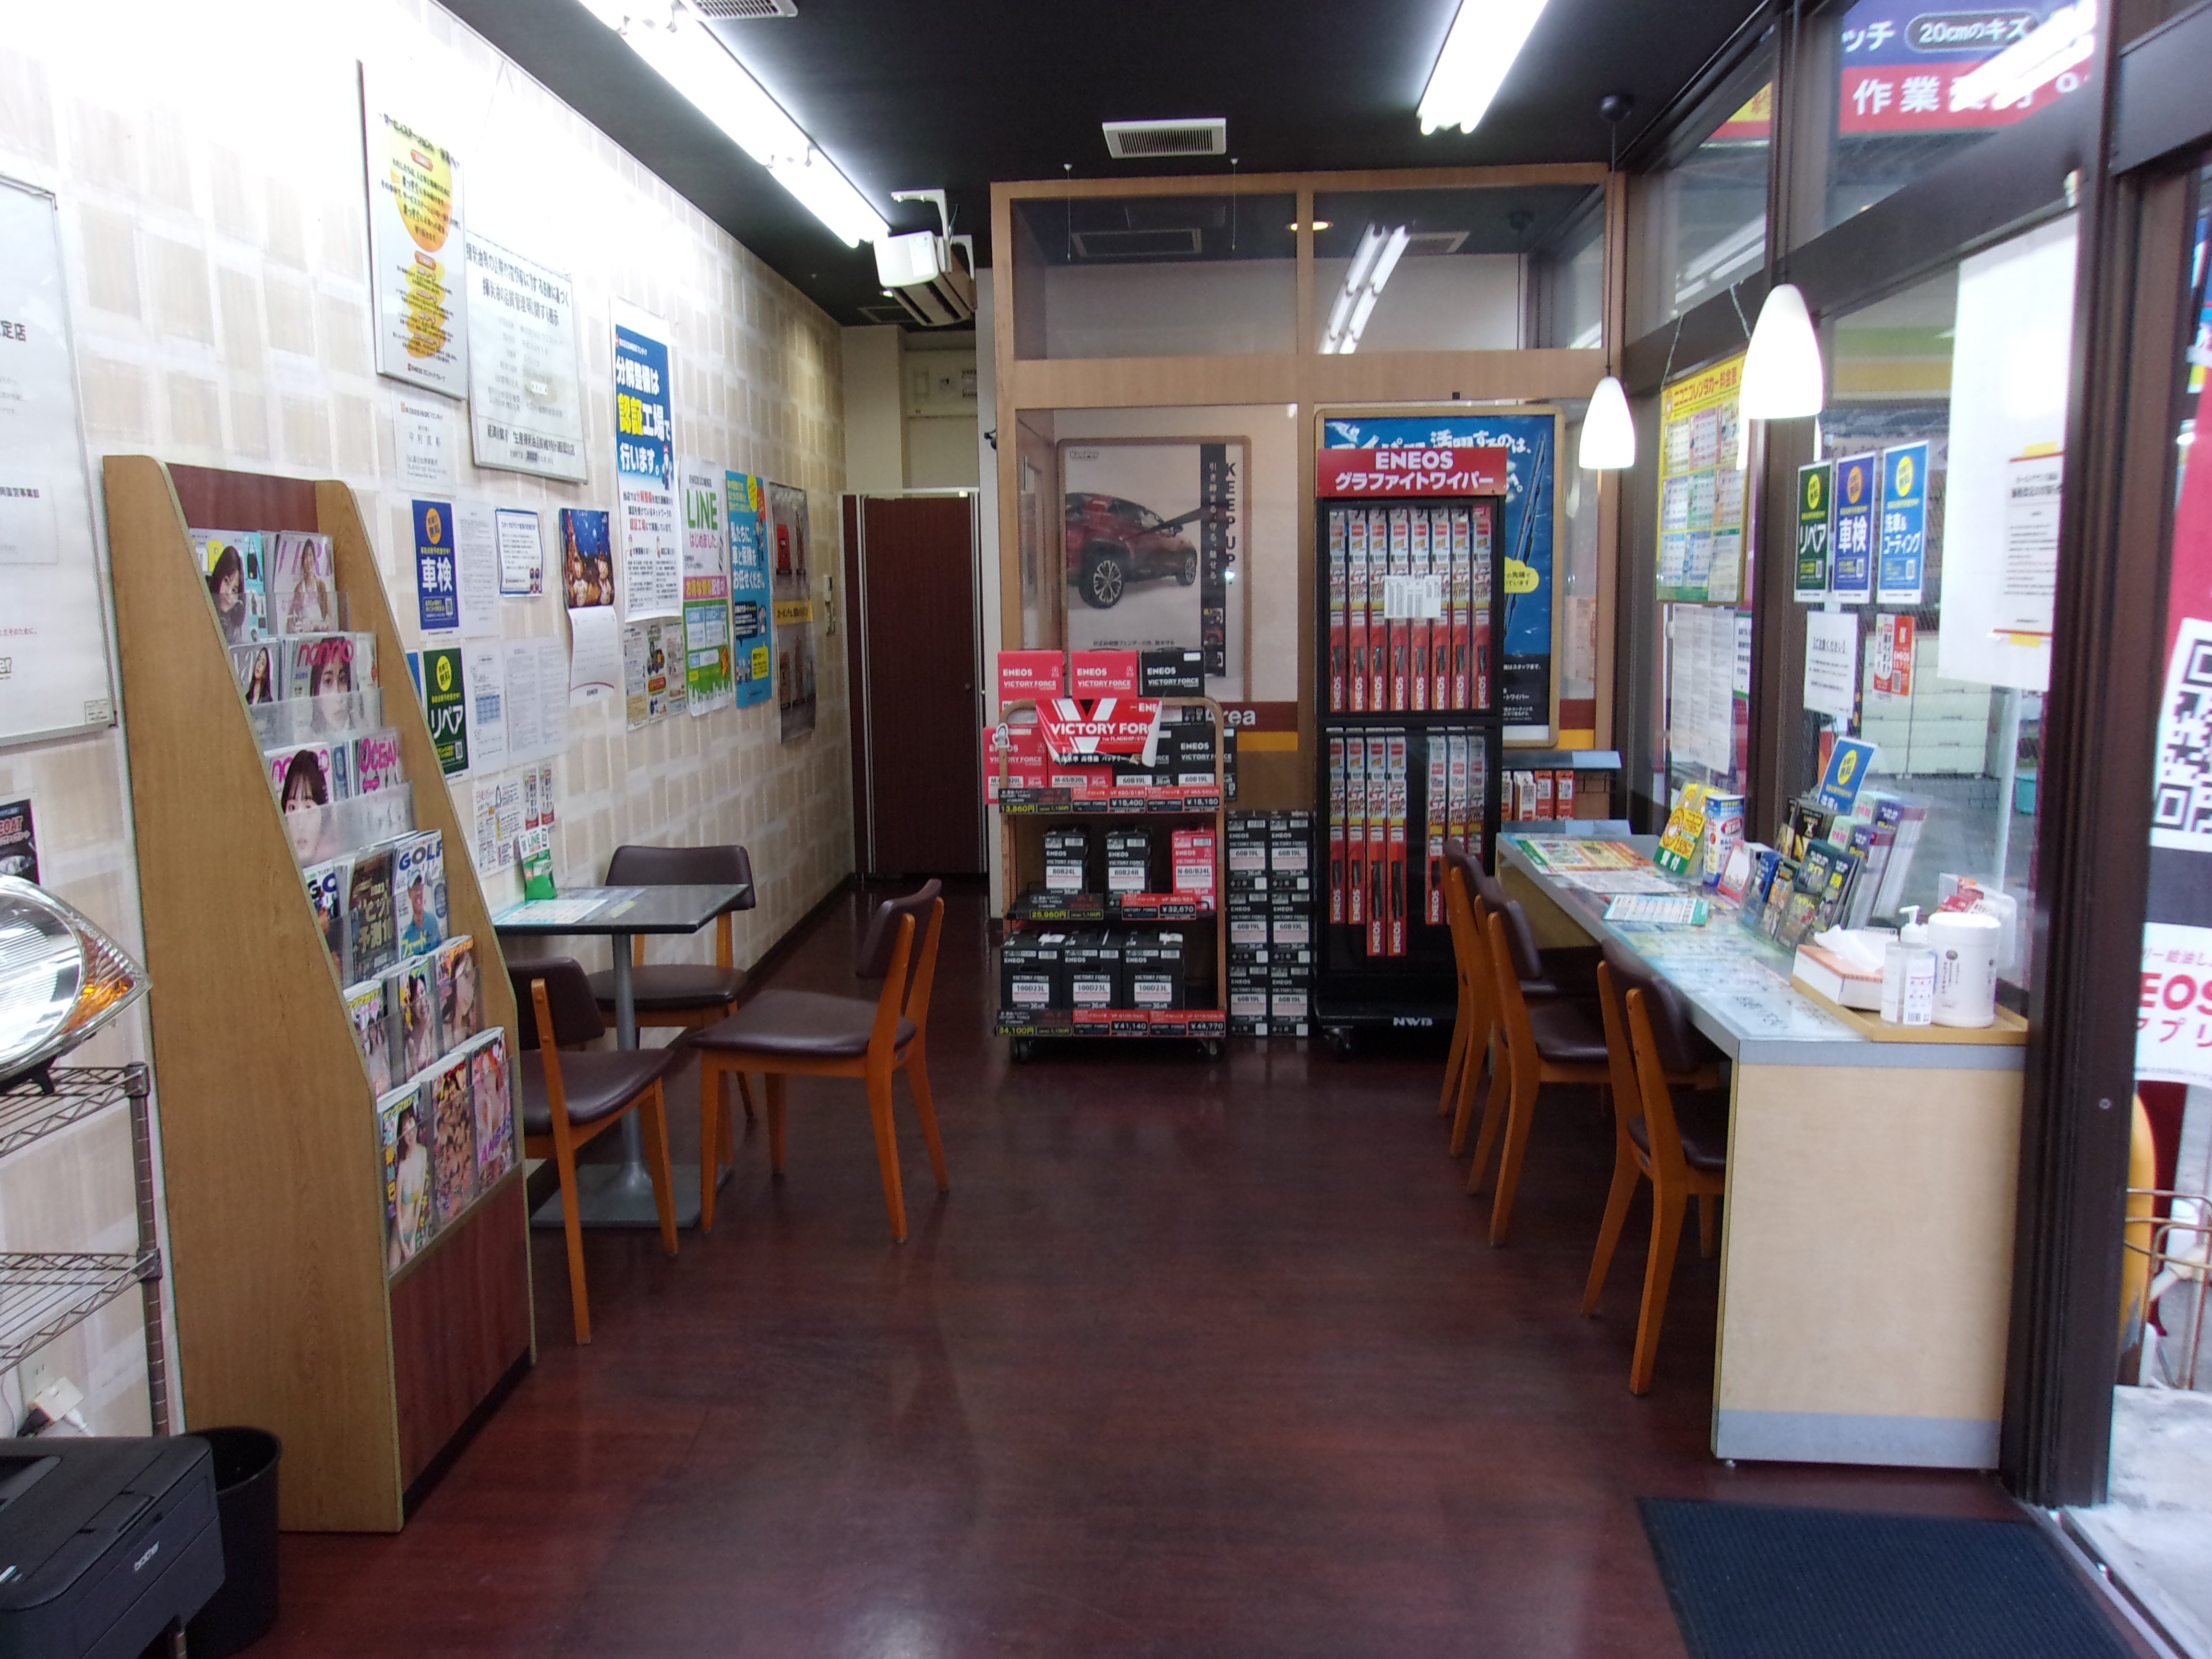 Images ENEOS Dr.Drive城南店(ENEOSフロンティア)